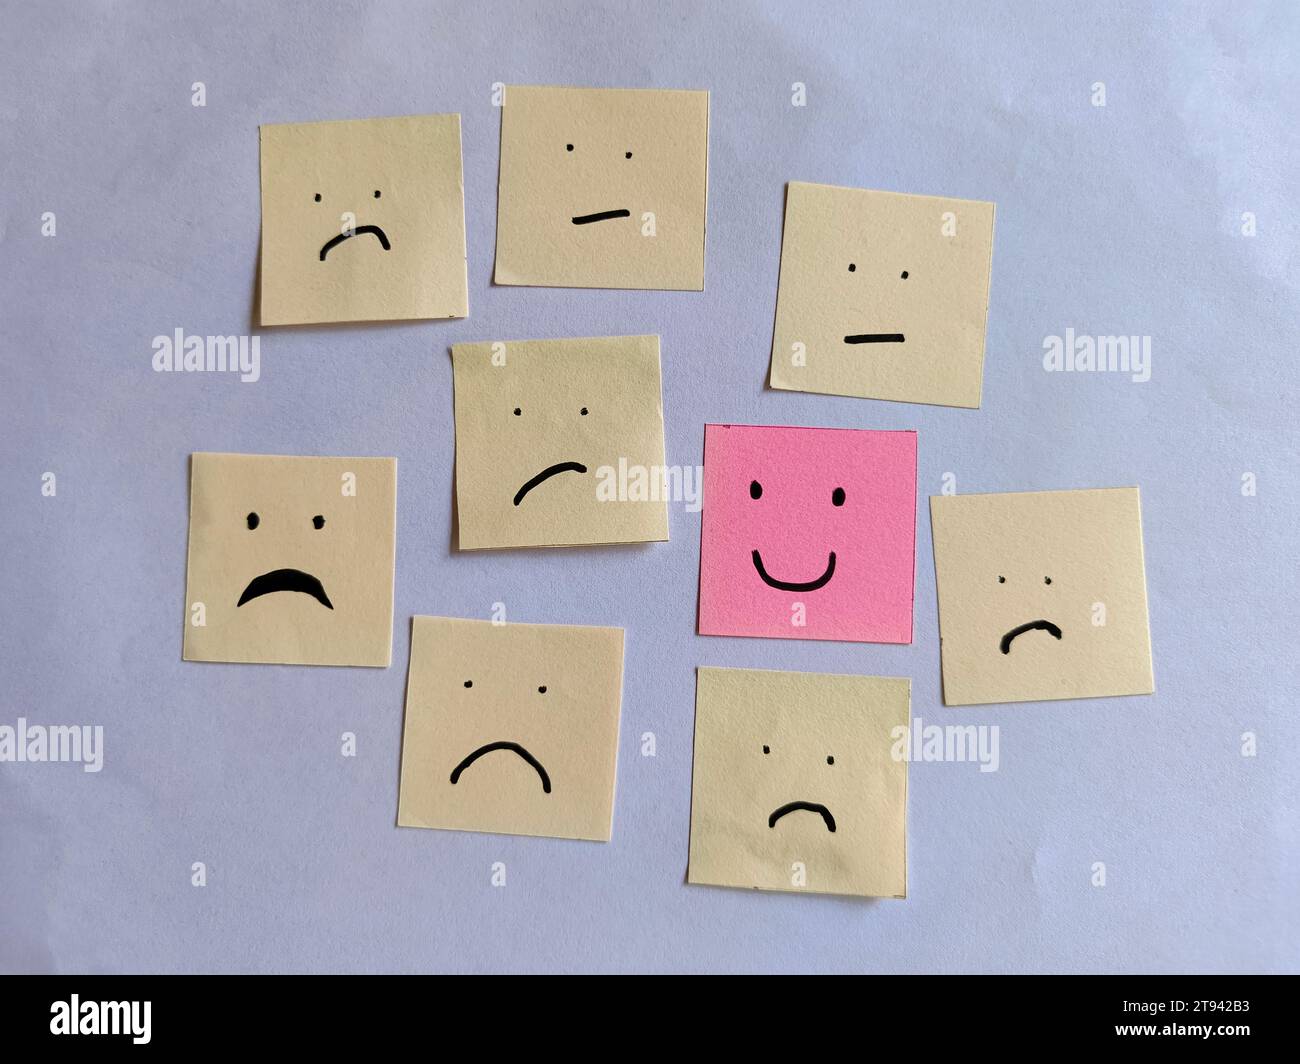 Concept of positive attitude. Hand drawn a smiling face which stands out form many sad faces, made with small office notes. Stock Photo